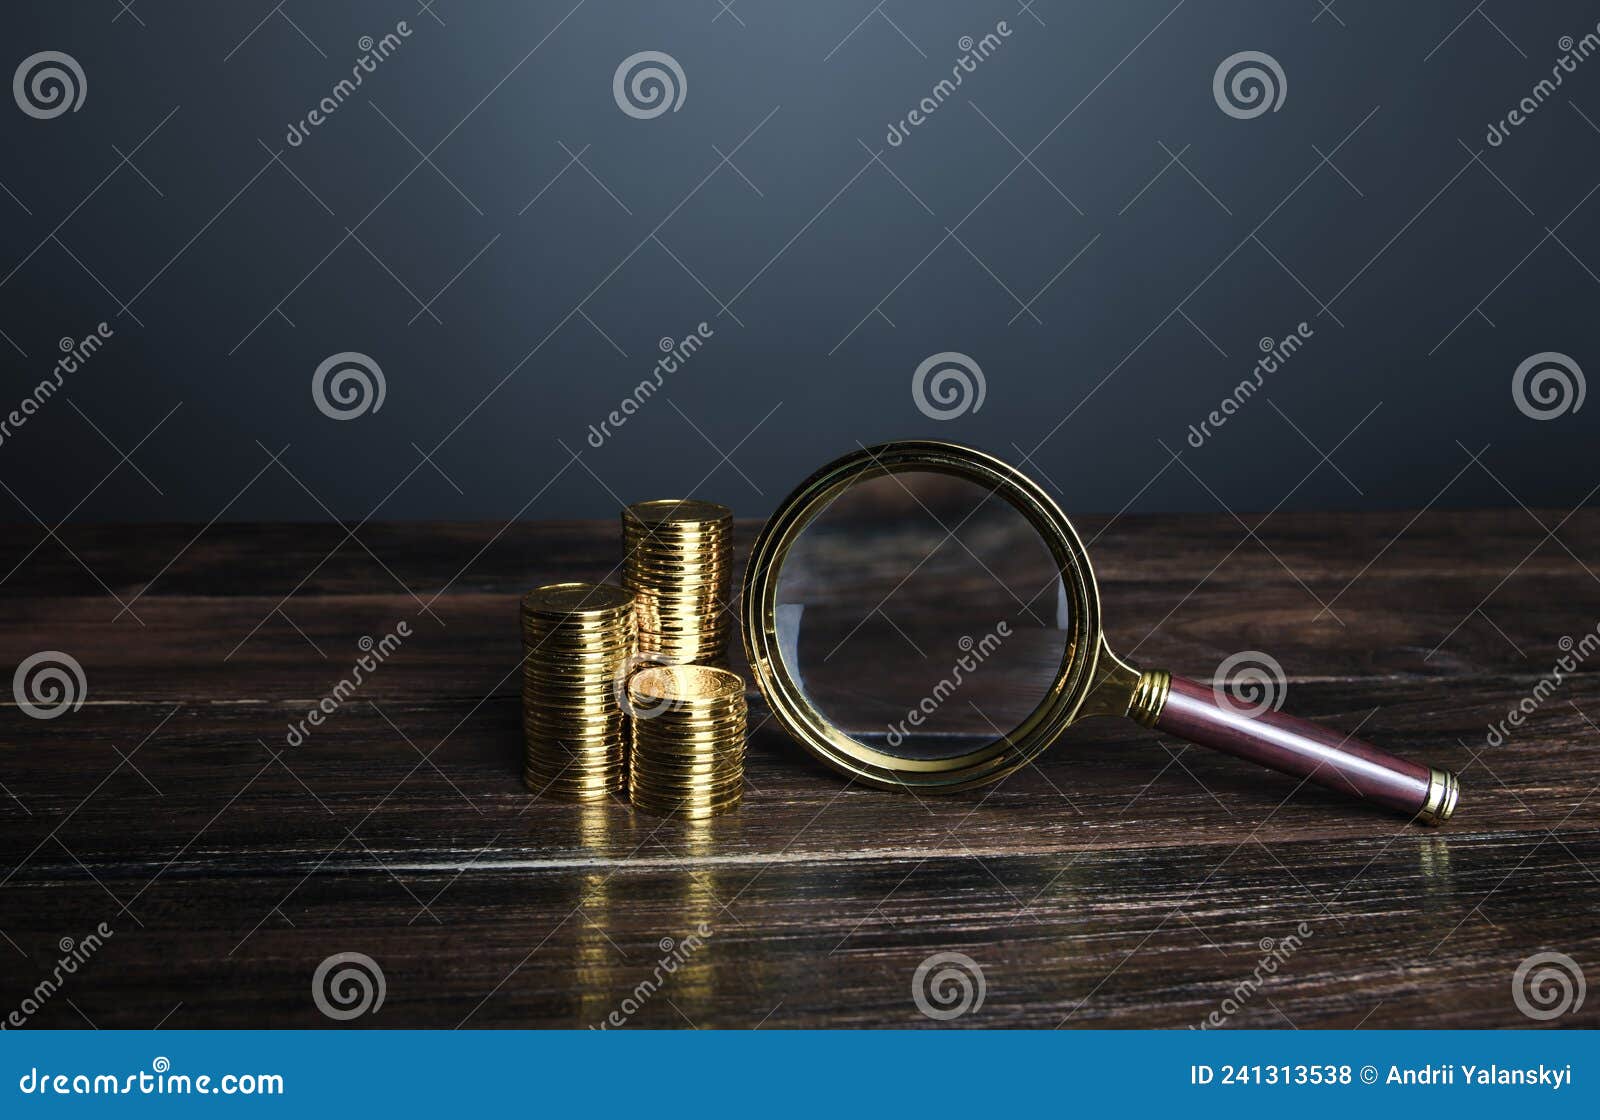 coins and magnifying glass. investigating capital origins. search for investments, fund new business projects. deposit or loan